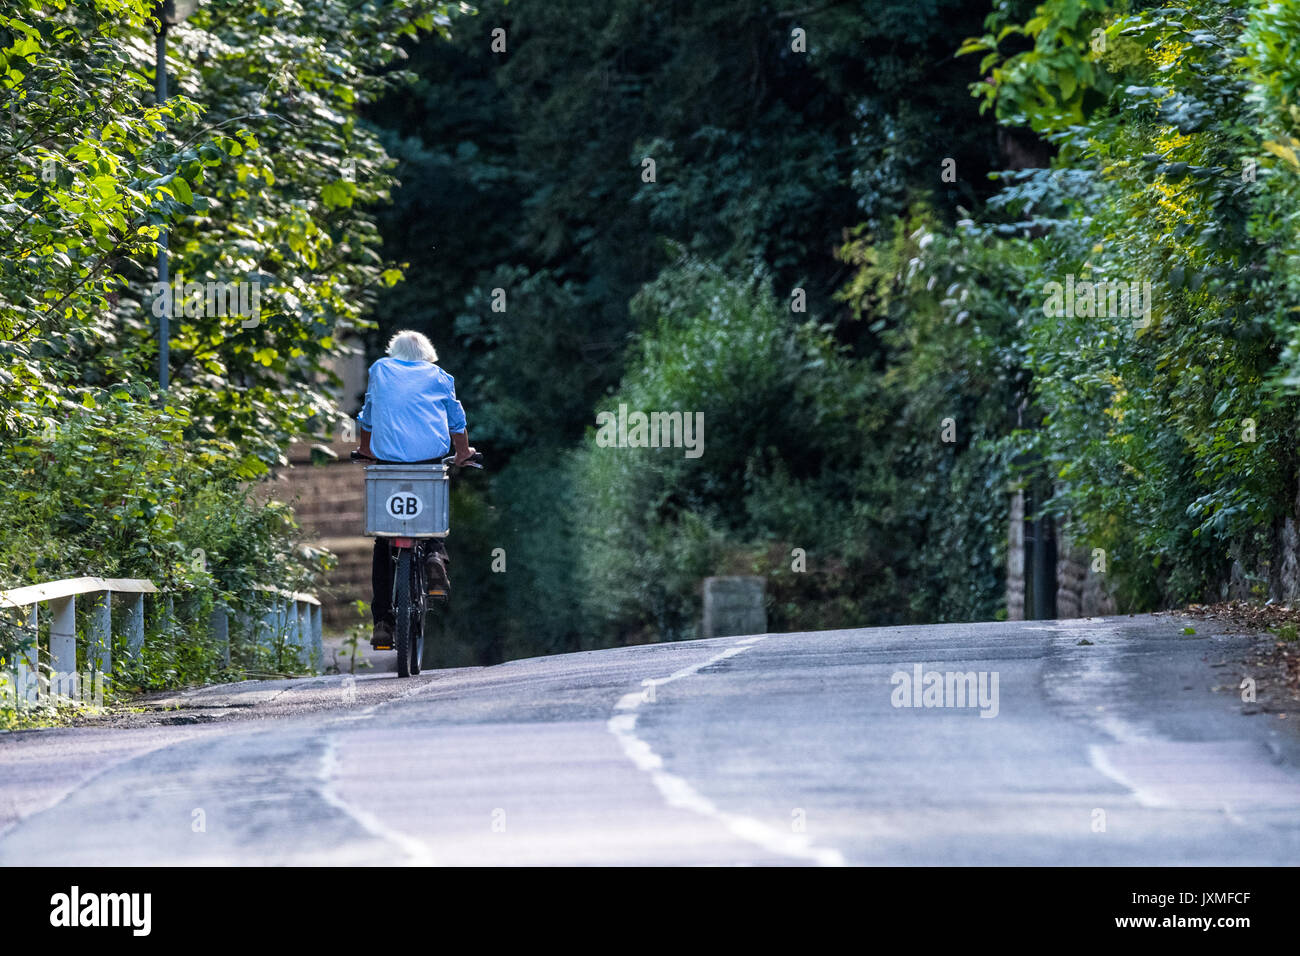 Male riding a bicycle on a country lane with G.B. sticker. Stock Photo